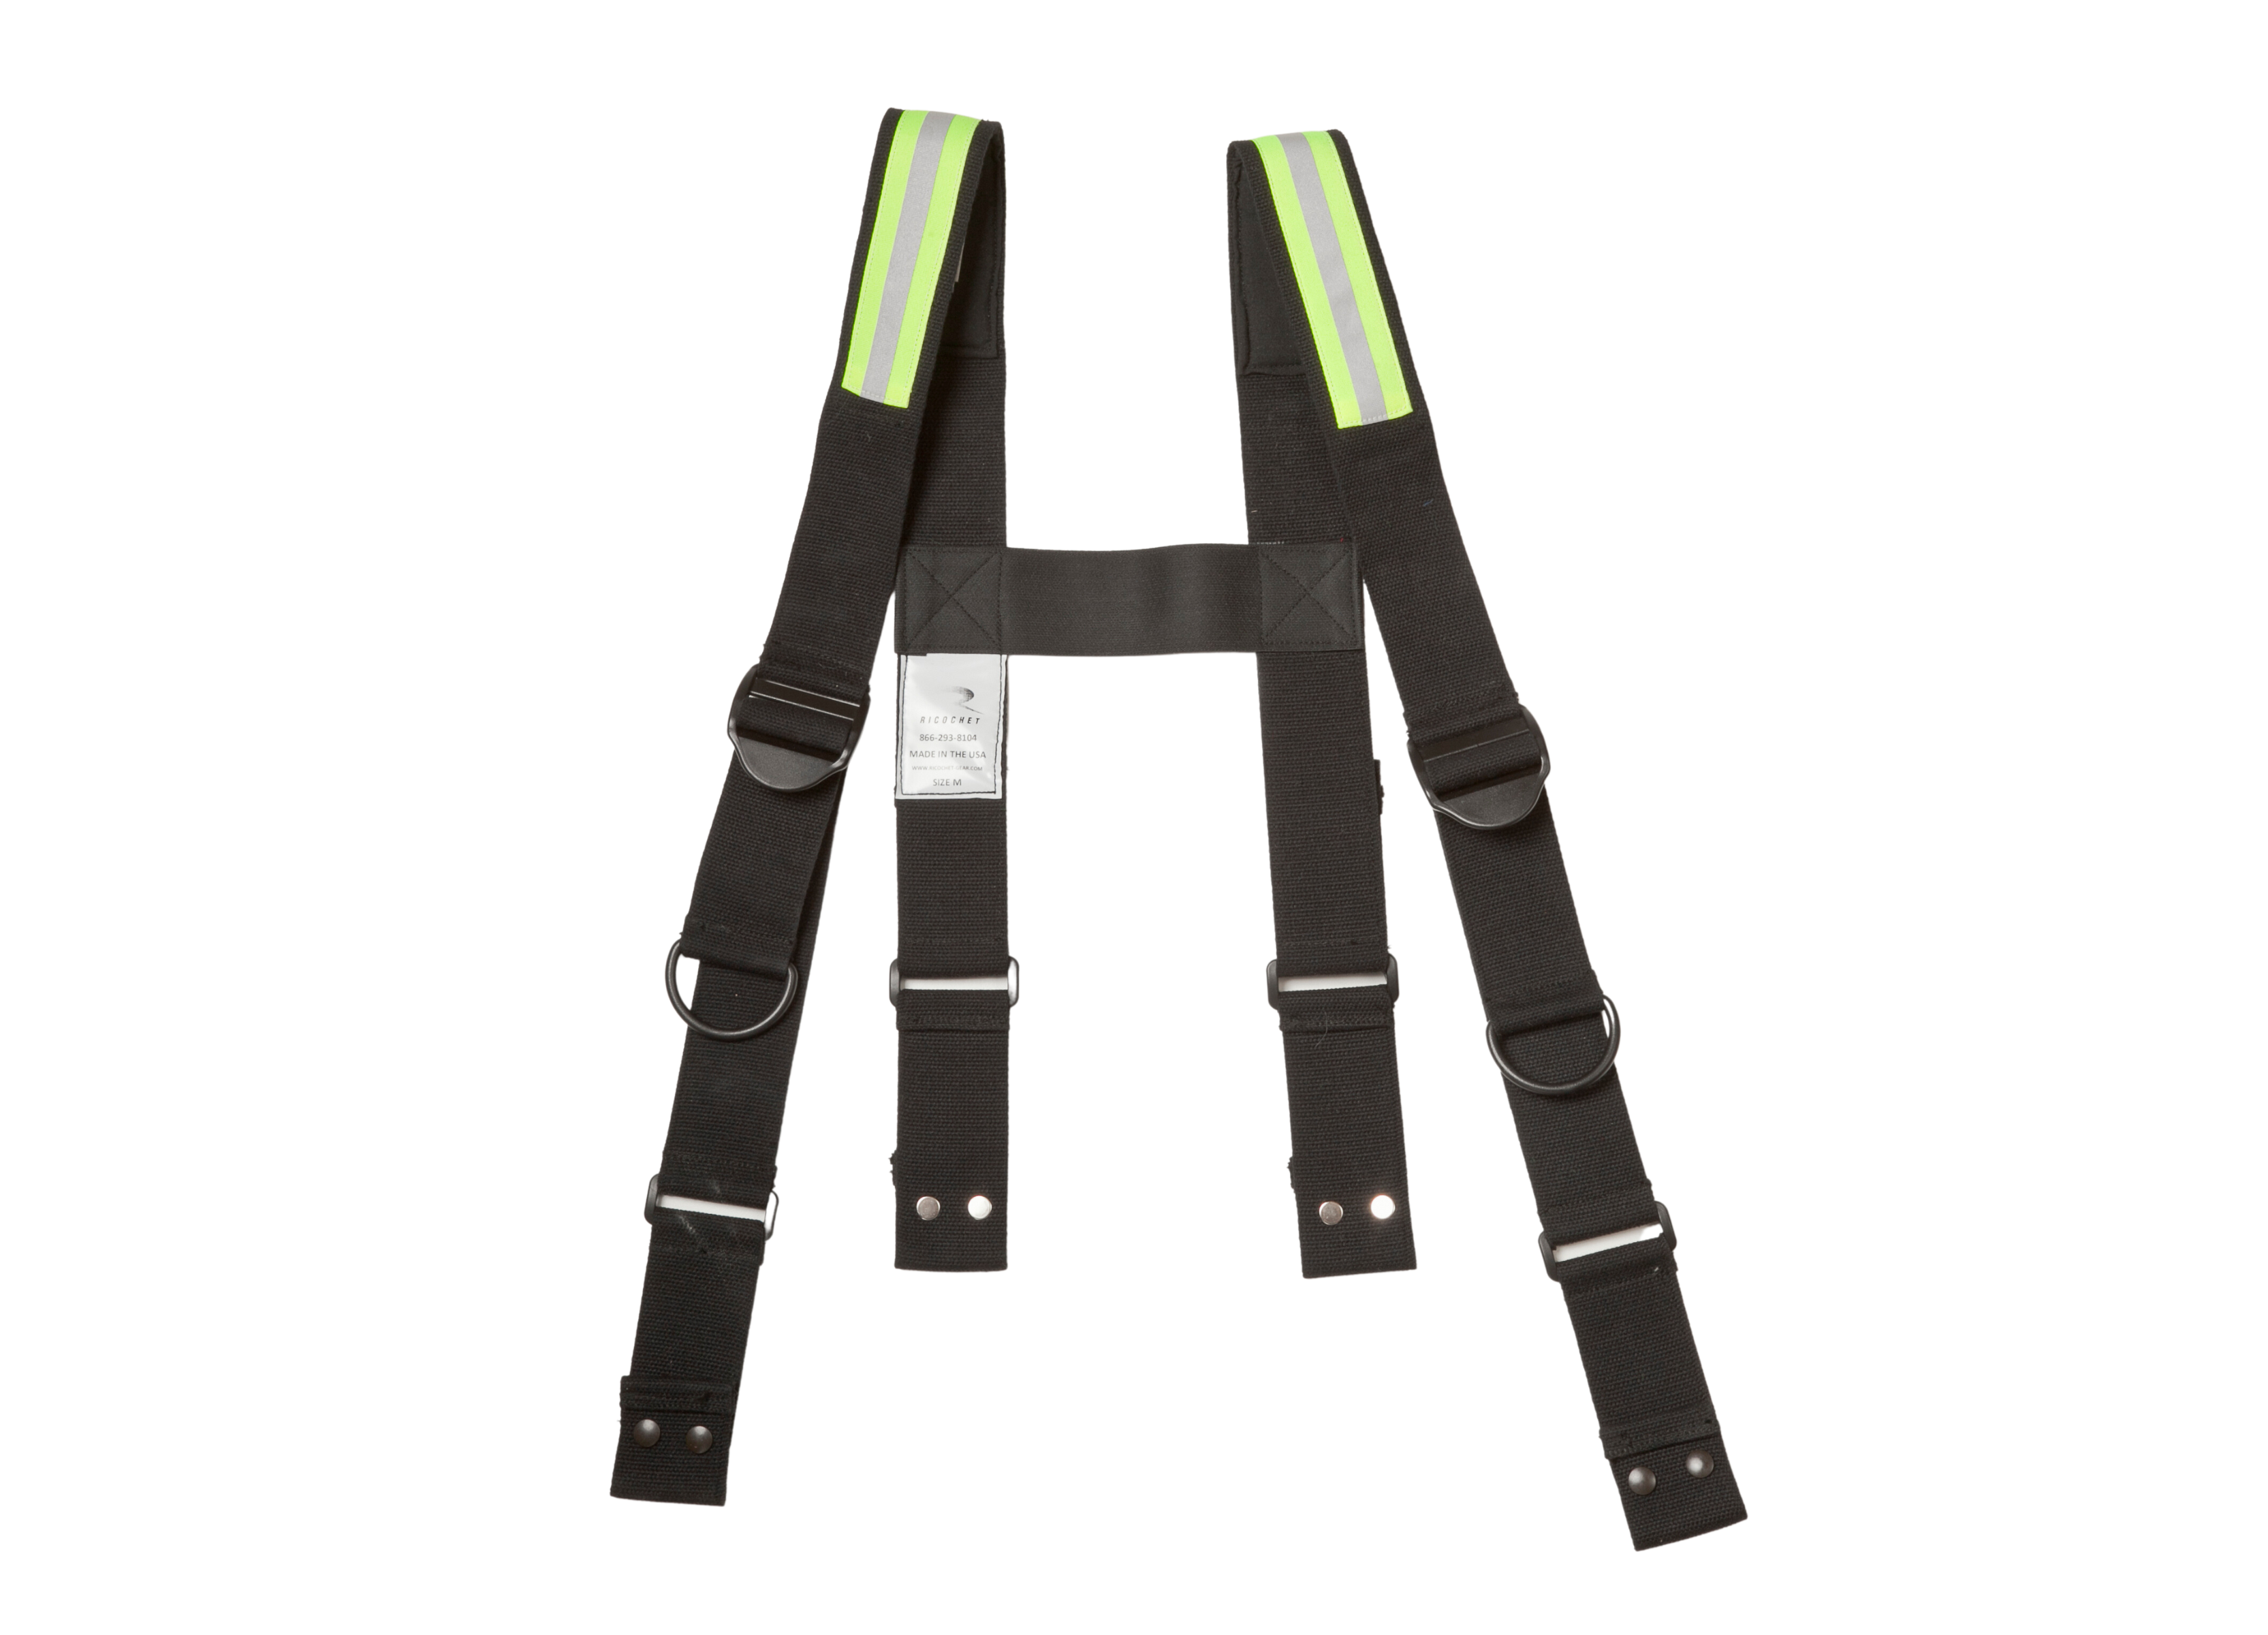 Parachute-Style-H-Back-Padded-Suspenders-with-Leather-Ends-GB-SUSP